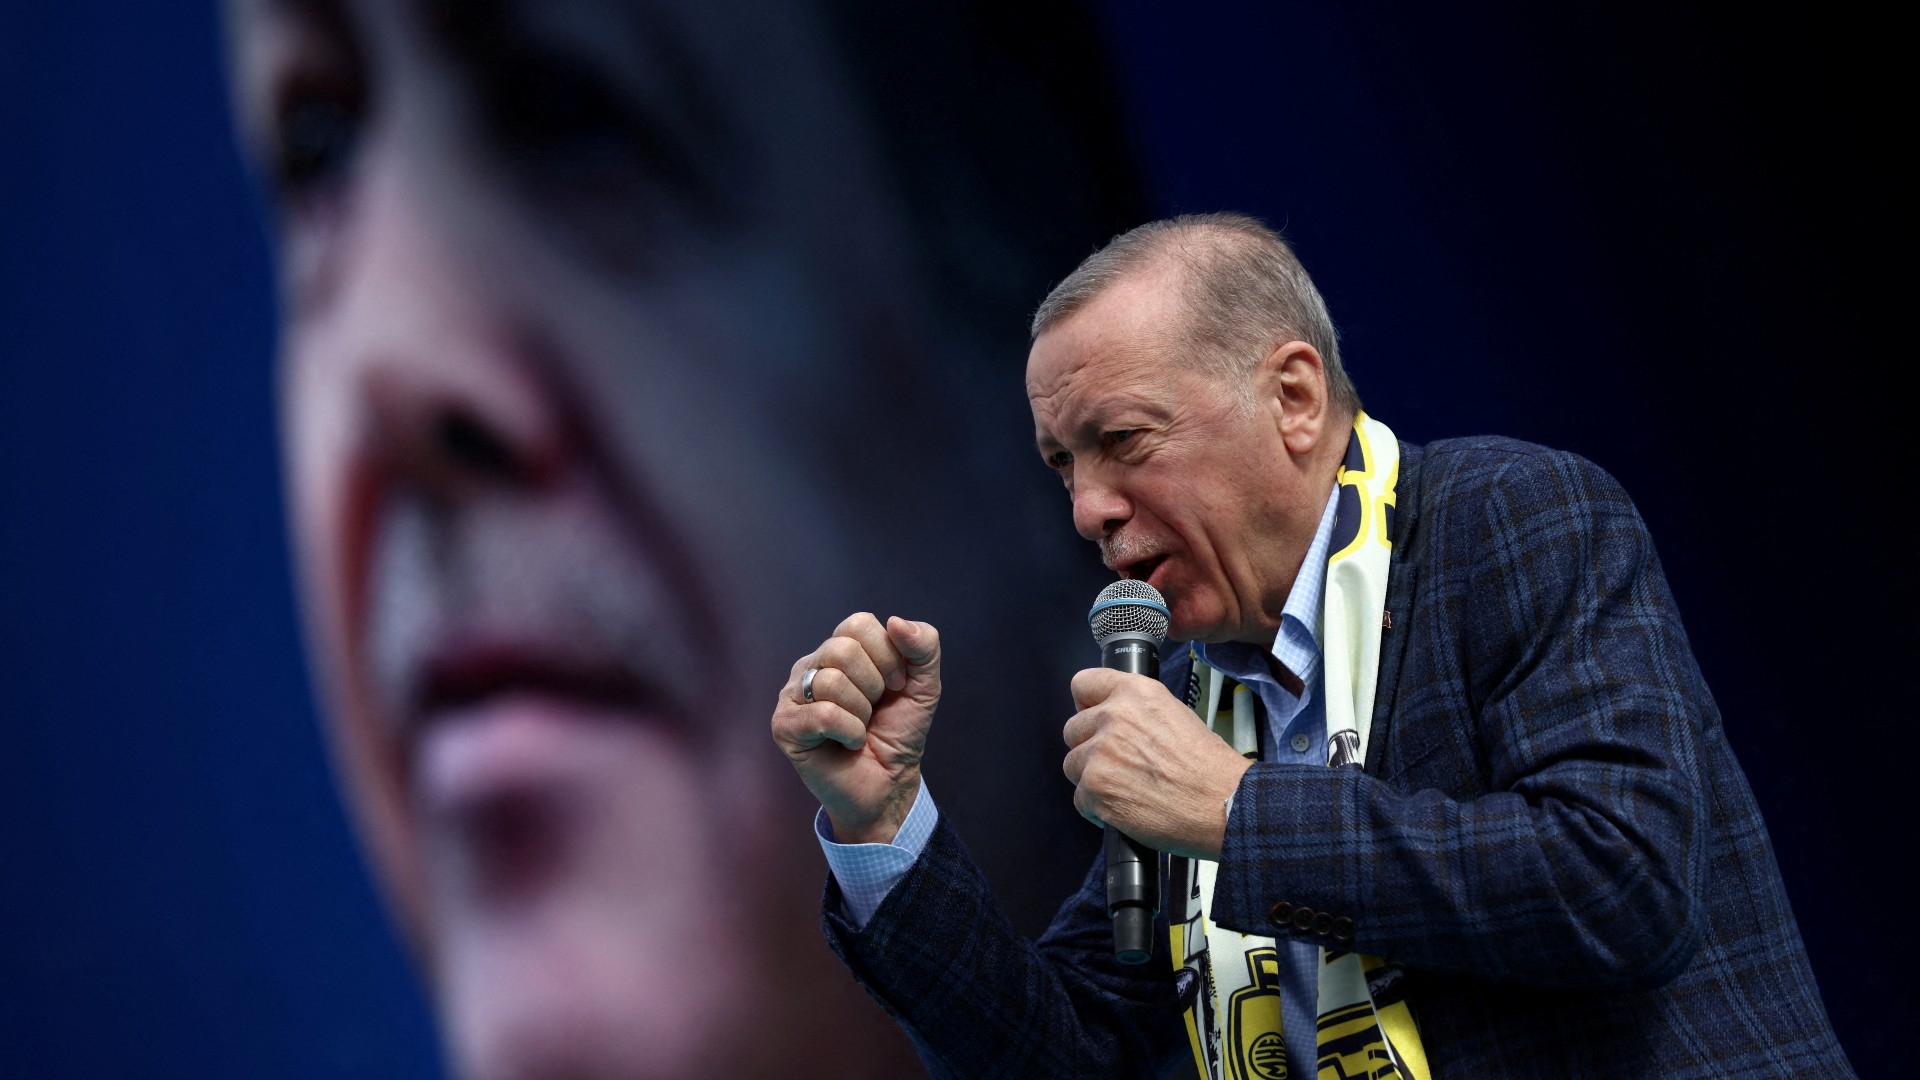 Turkish President Recep Tayyip Erdogan addresses his supporters during a rally ahead of the 14 May elections, in Ankara, 30 April (Reuters)